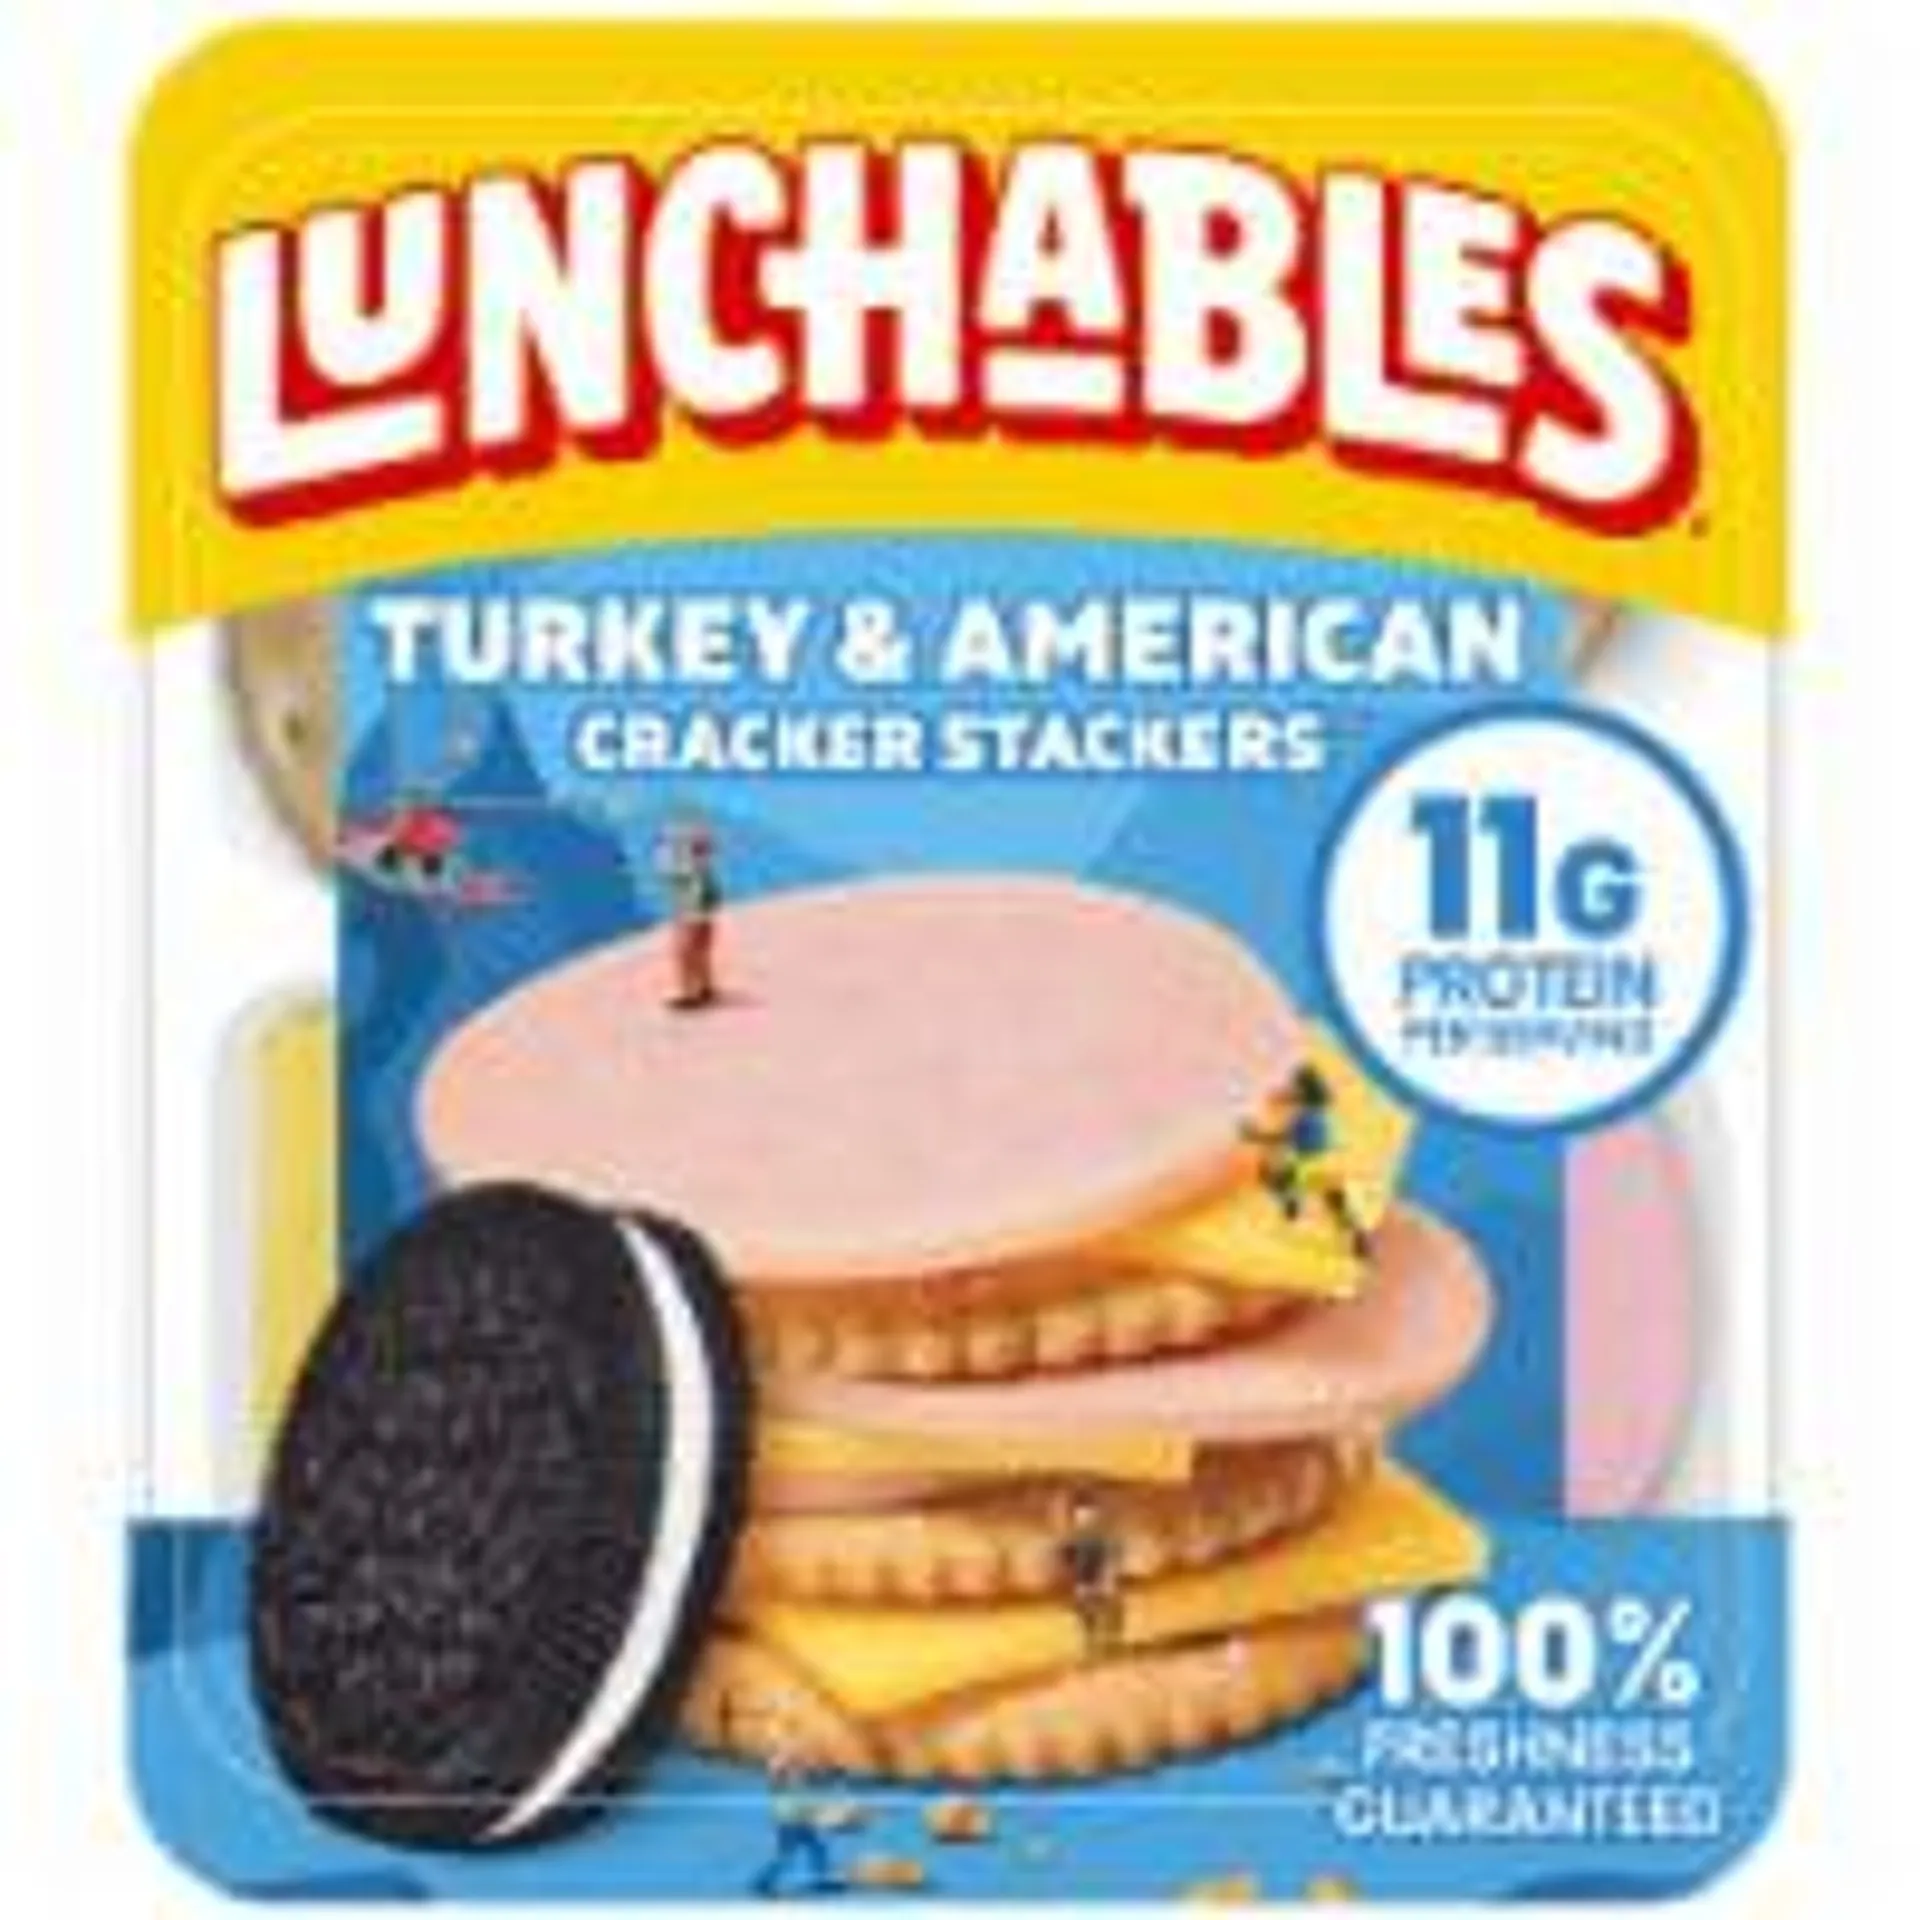 Lunchables Turkey & American Cheese Cracker Snack Kit with Chocolate Sandwich Cookies